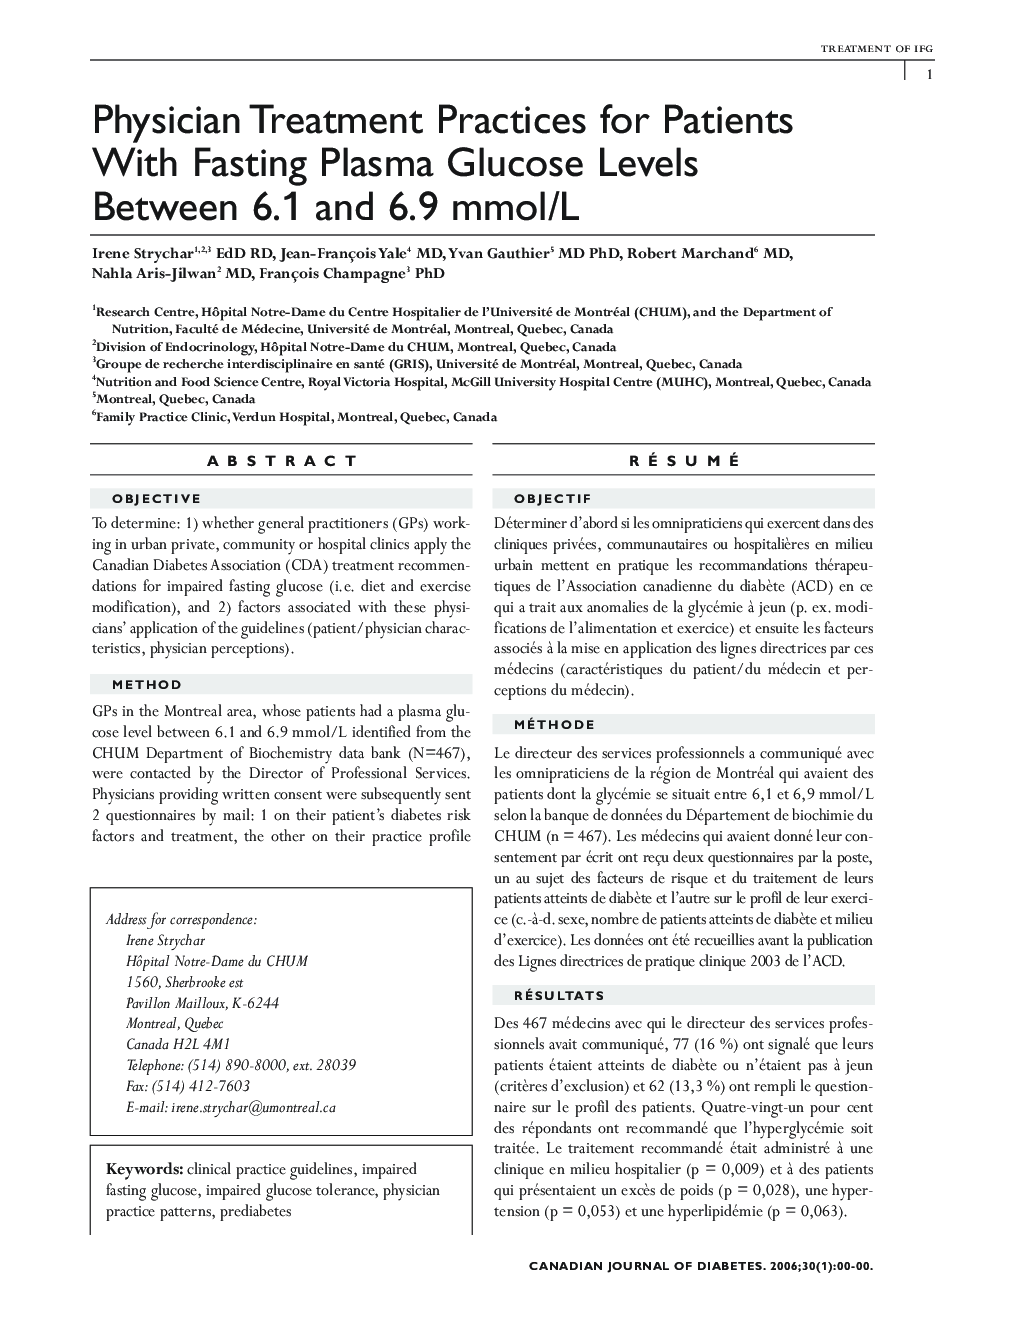 Physician Treatment Practices for Patients With Fasting Plasma Glucose Levels Between 6.1 and 6.9 mmol/L